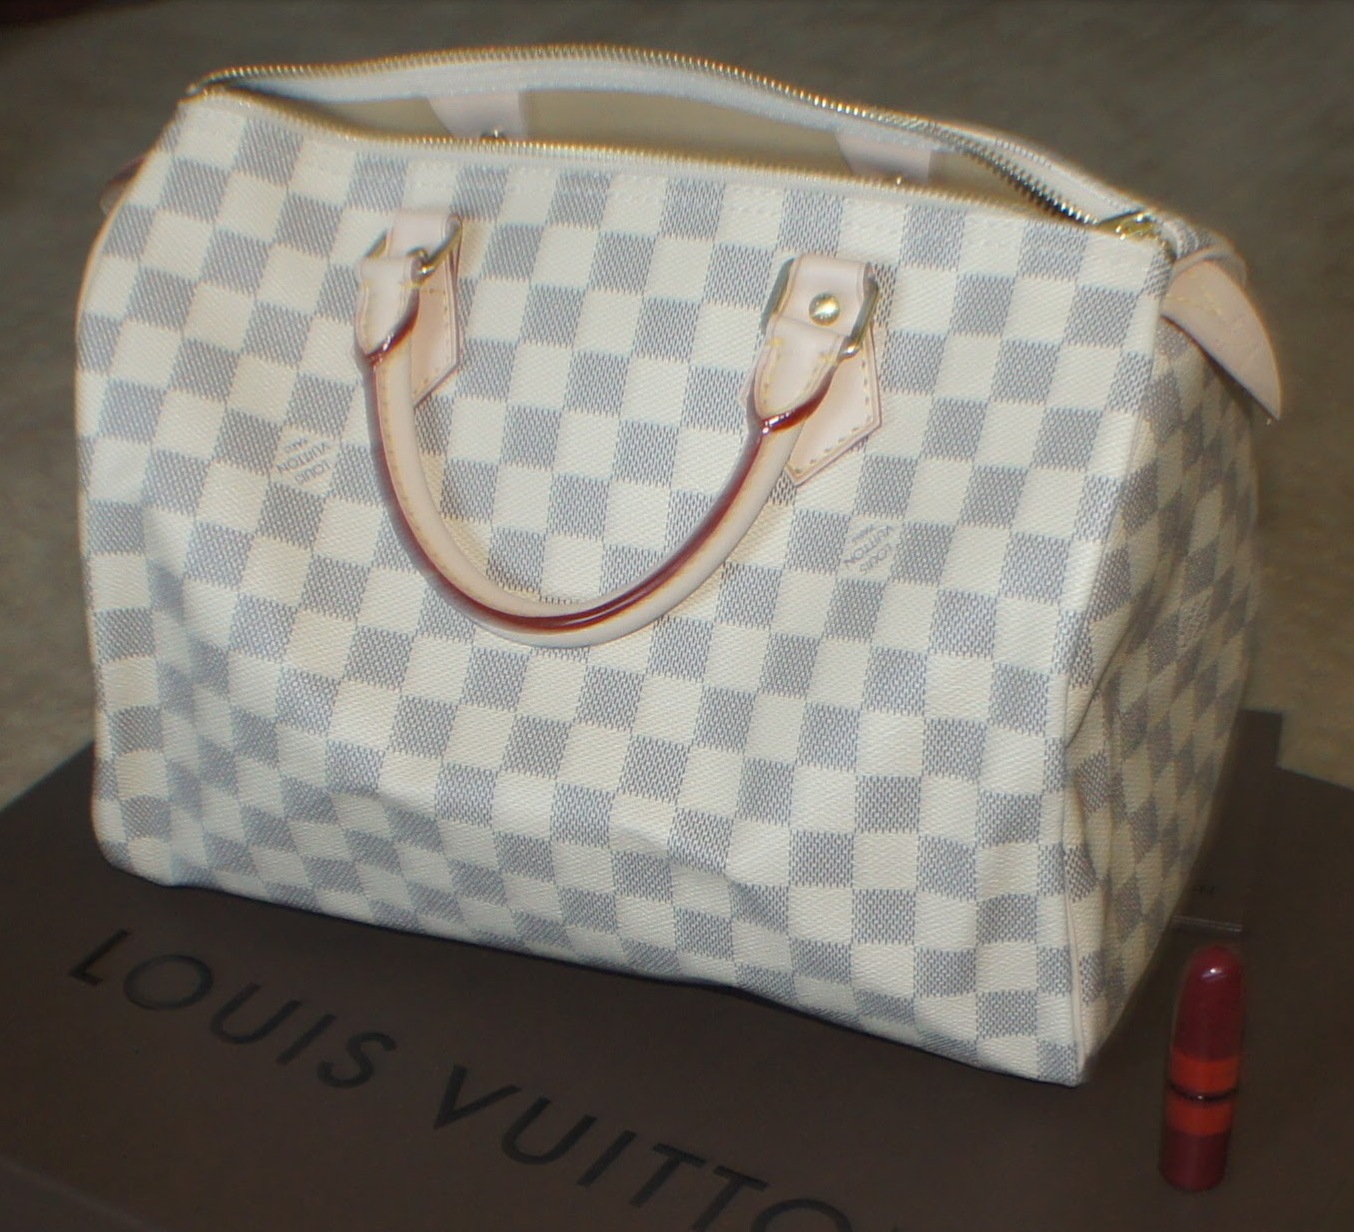 A Review of the Louis Vuitton Speedy 30